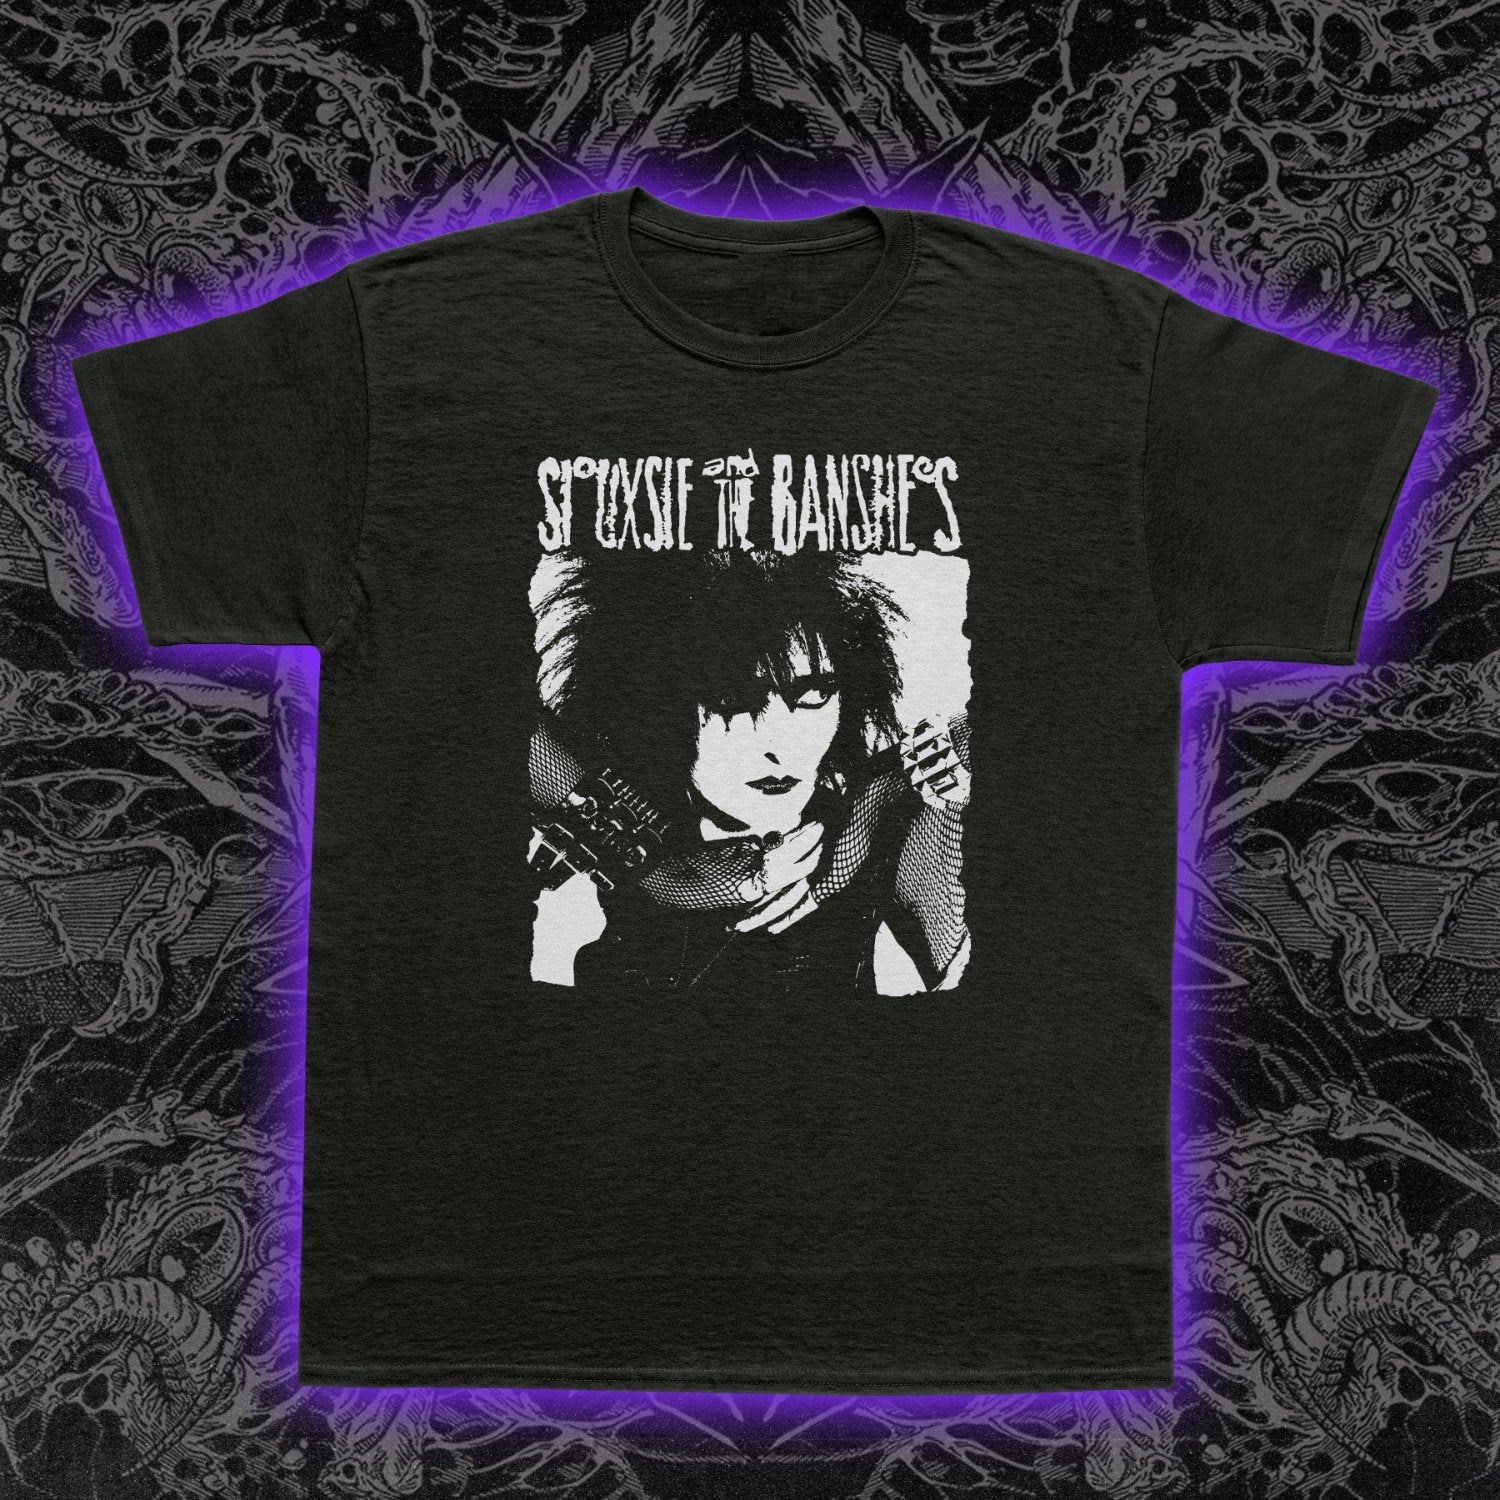 Siouxsie And The Banshees Portrait Premium Tee